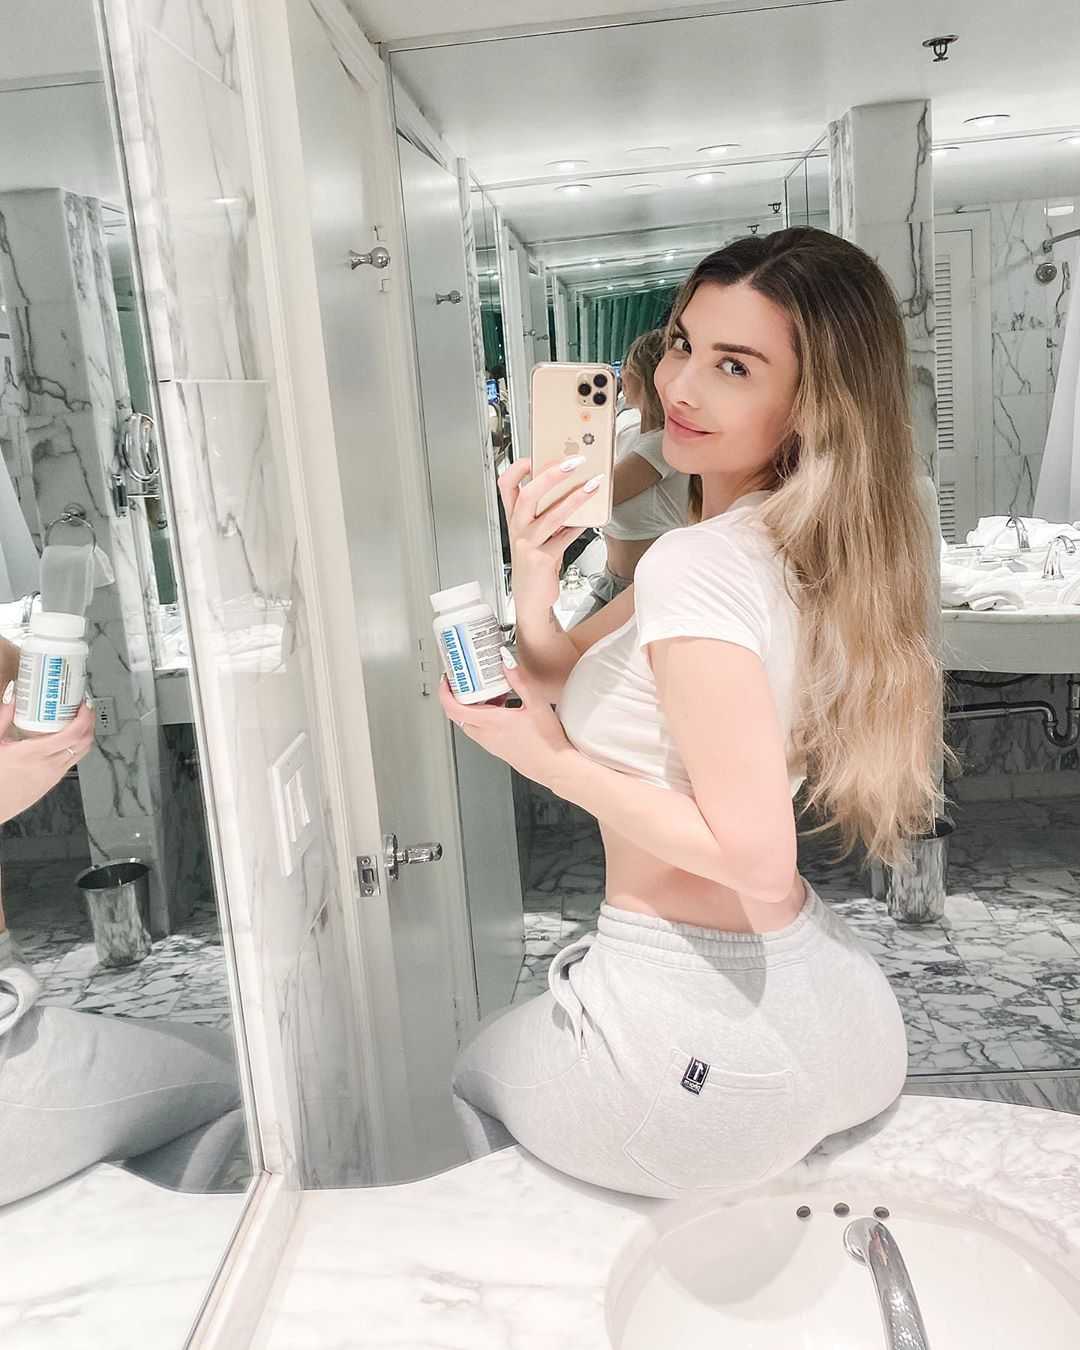 75+ Hot Pictures Of Emily Sears Will Make You Love Australian Women Even More | Best Of Comic Books